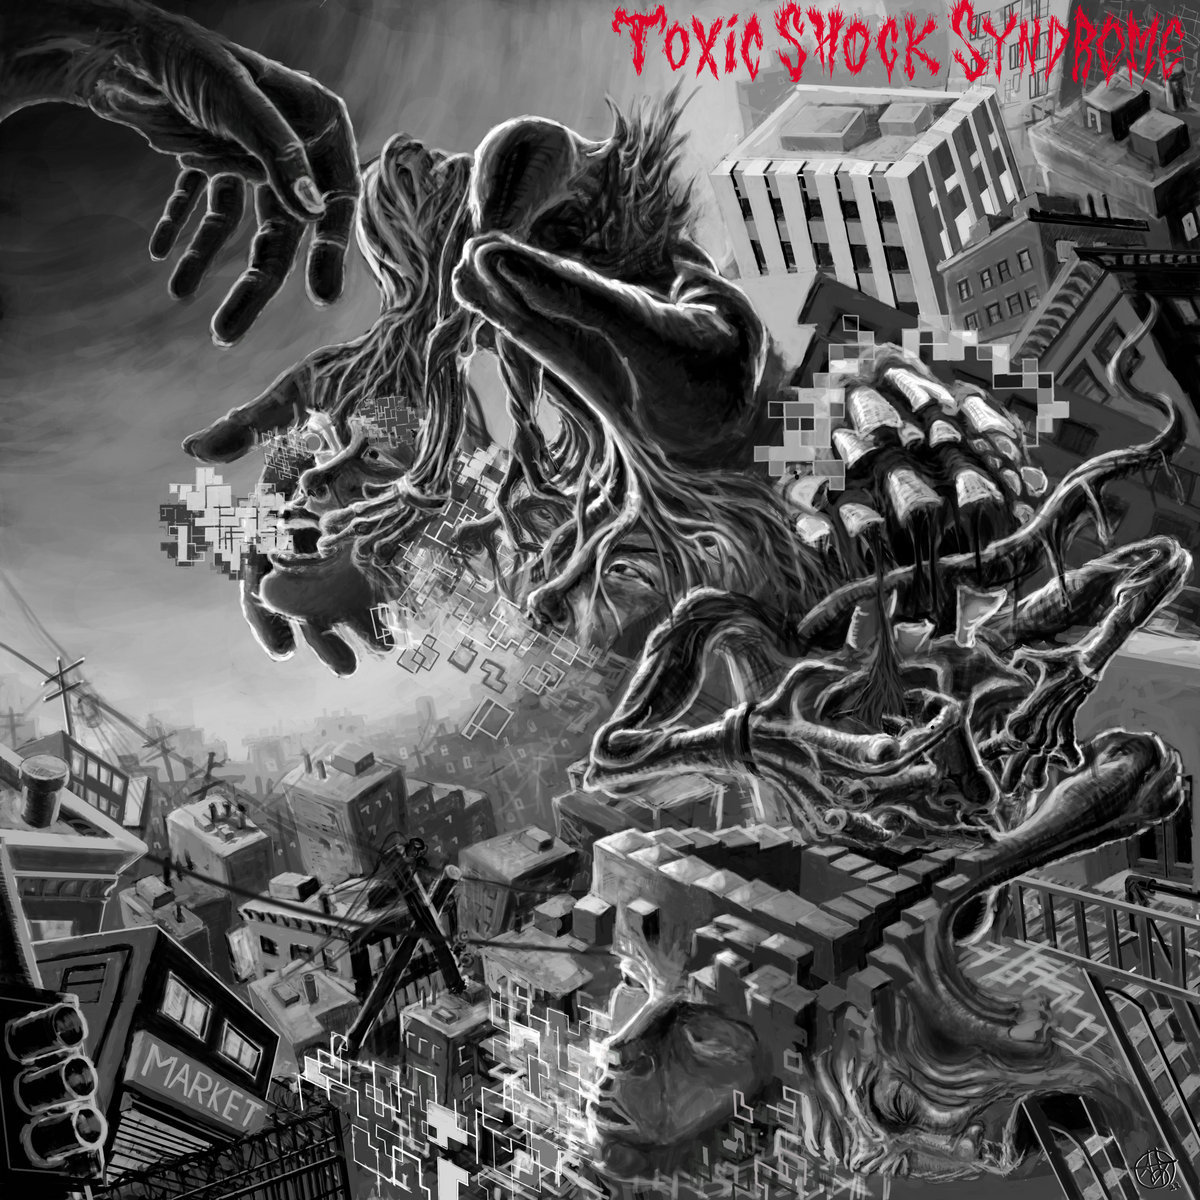 Toxic Shock Syndrome - "Till Death" - 2023